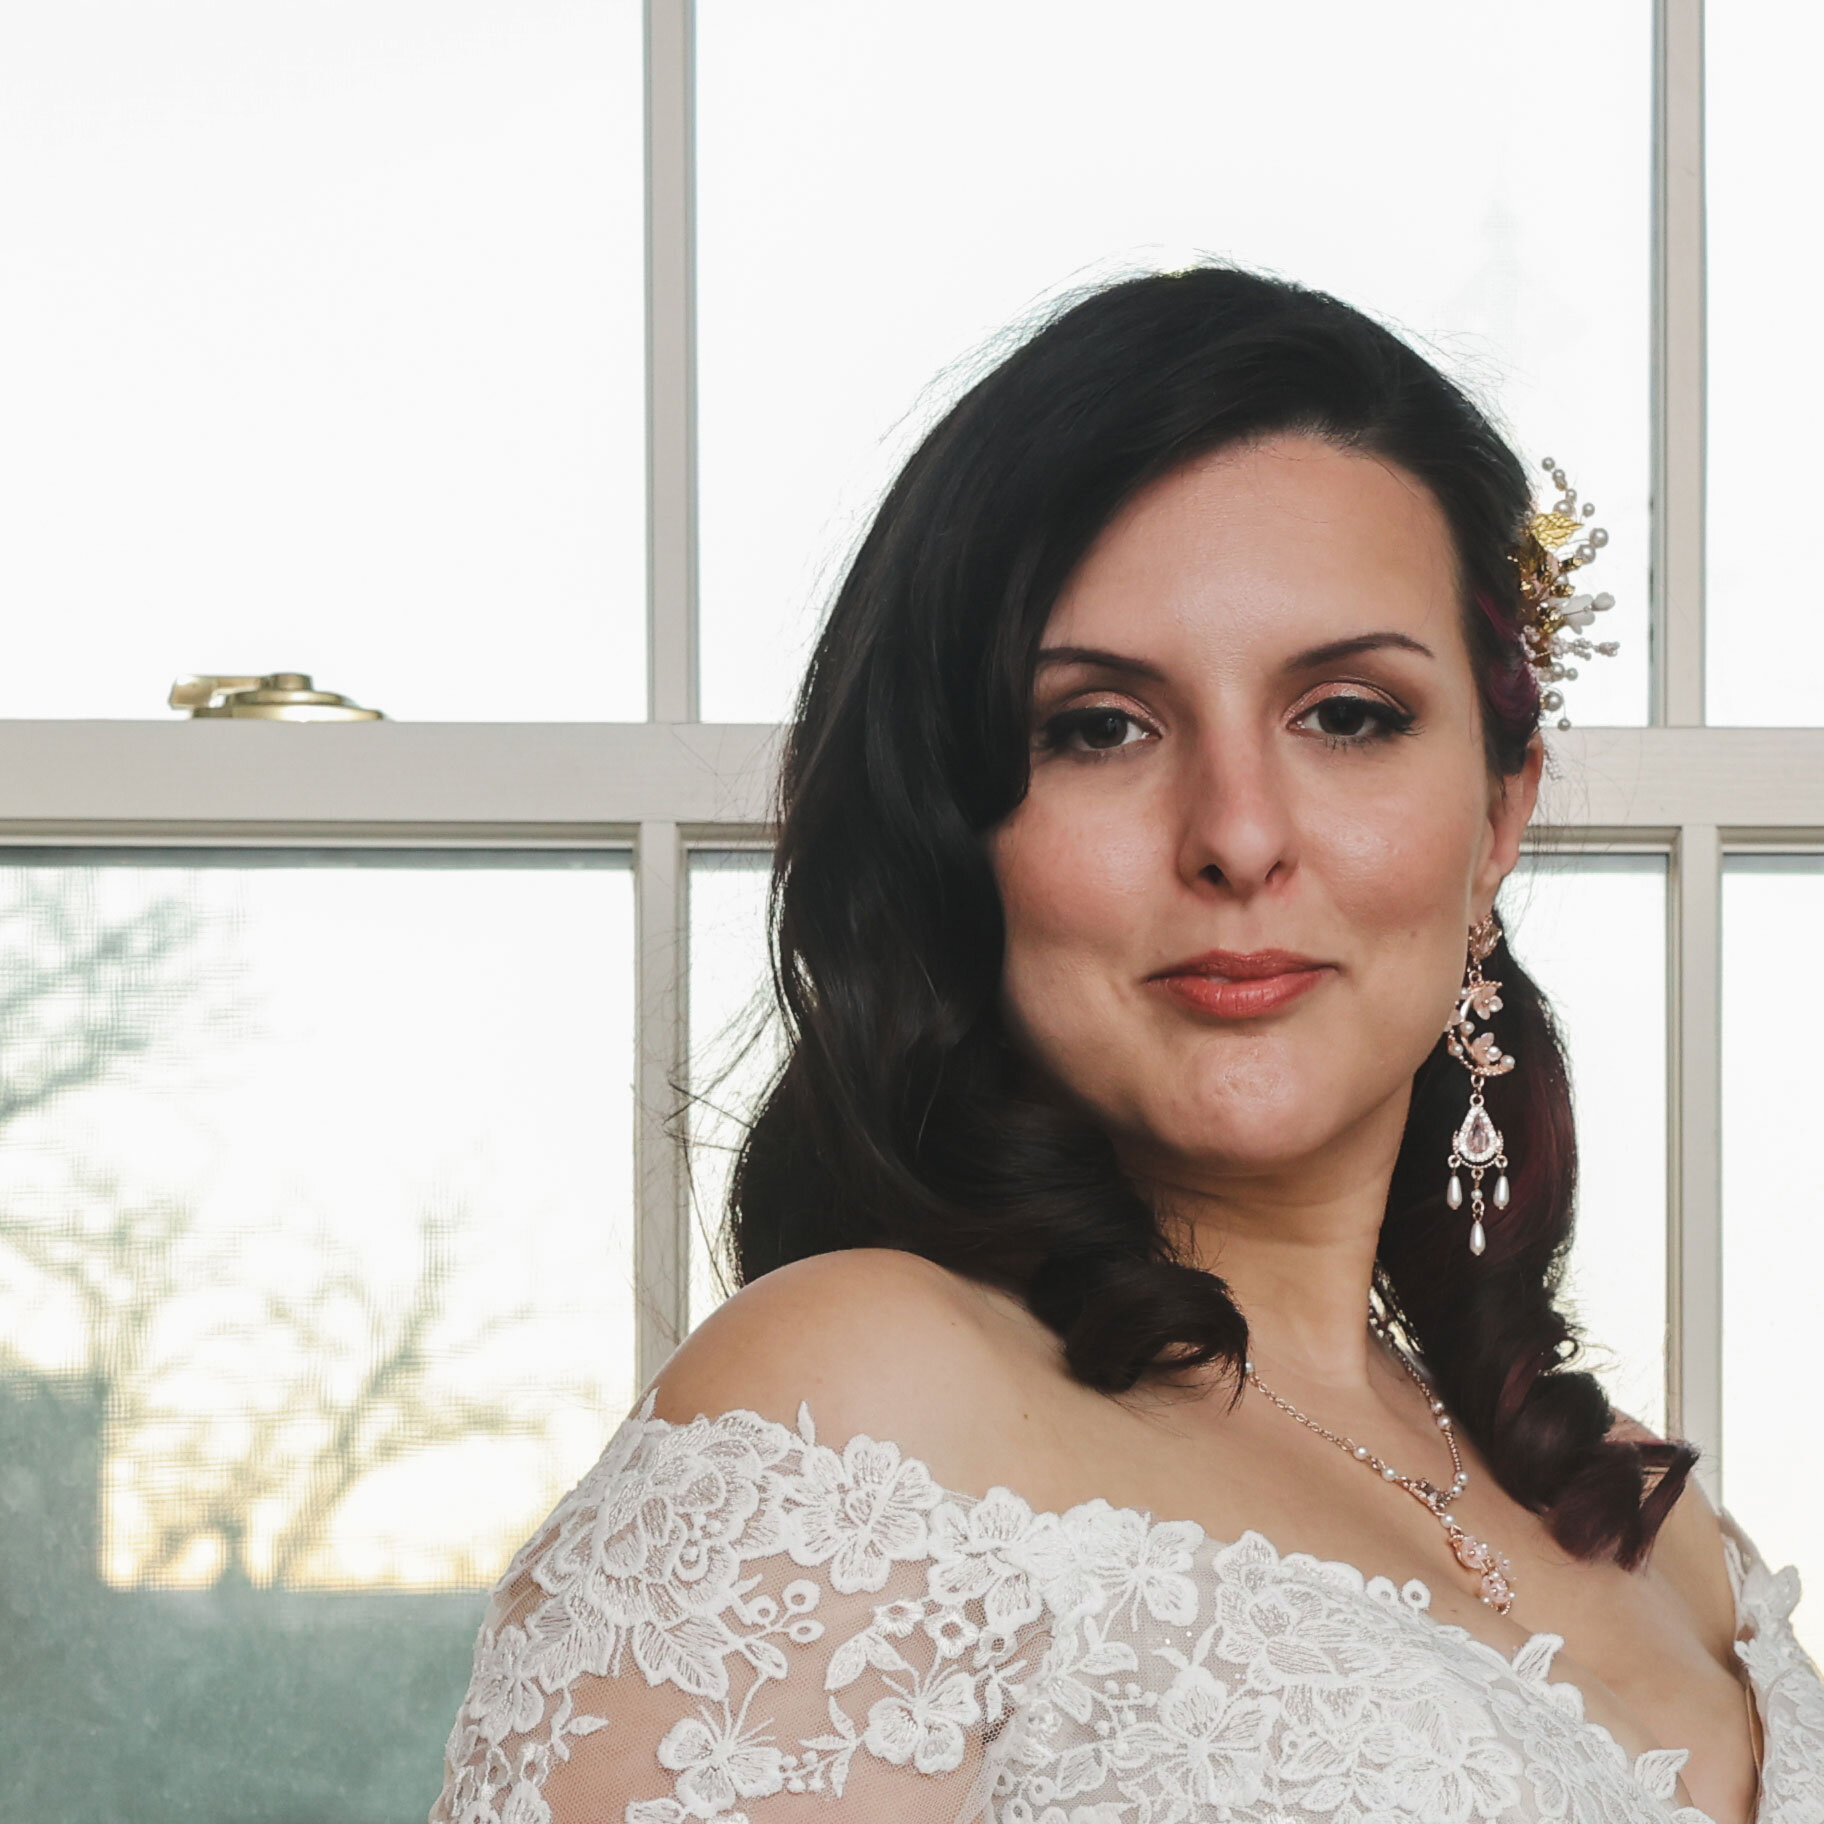 In the spotlight we have our lovely bride Kara, and you can't see the chaos around as she gets ready for her wedding day. It's always a challenge to find these aesthetic angles and bits of isolation in a frenetic environment like a bridal party getti